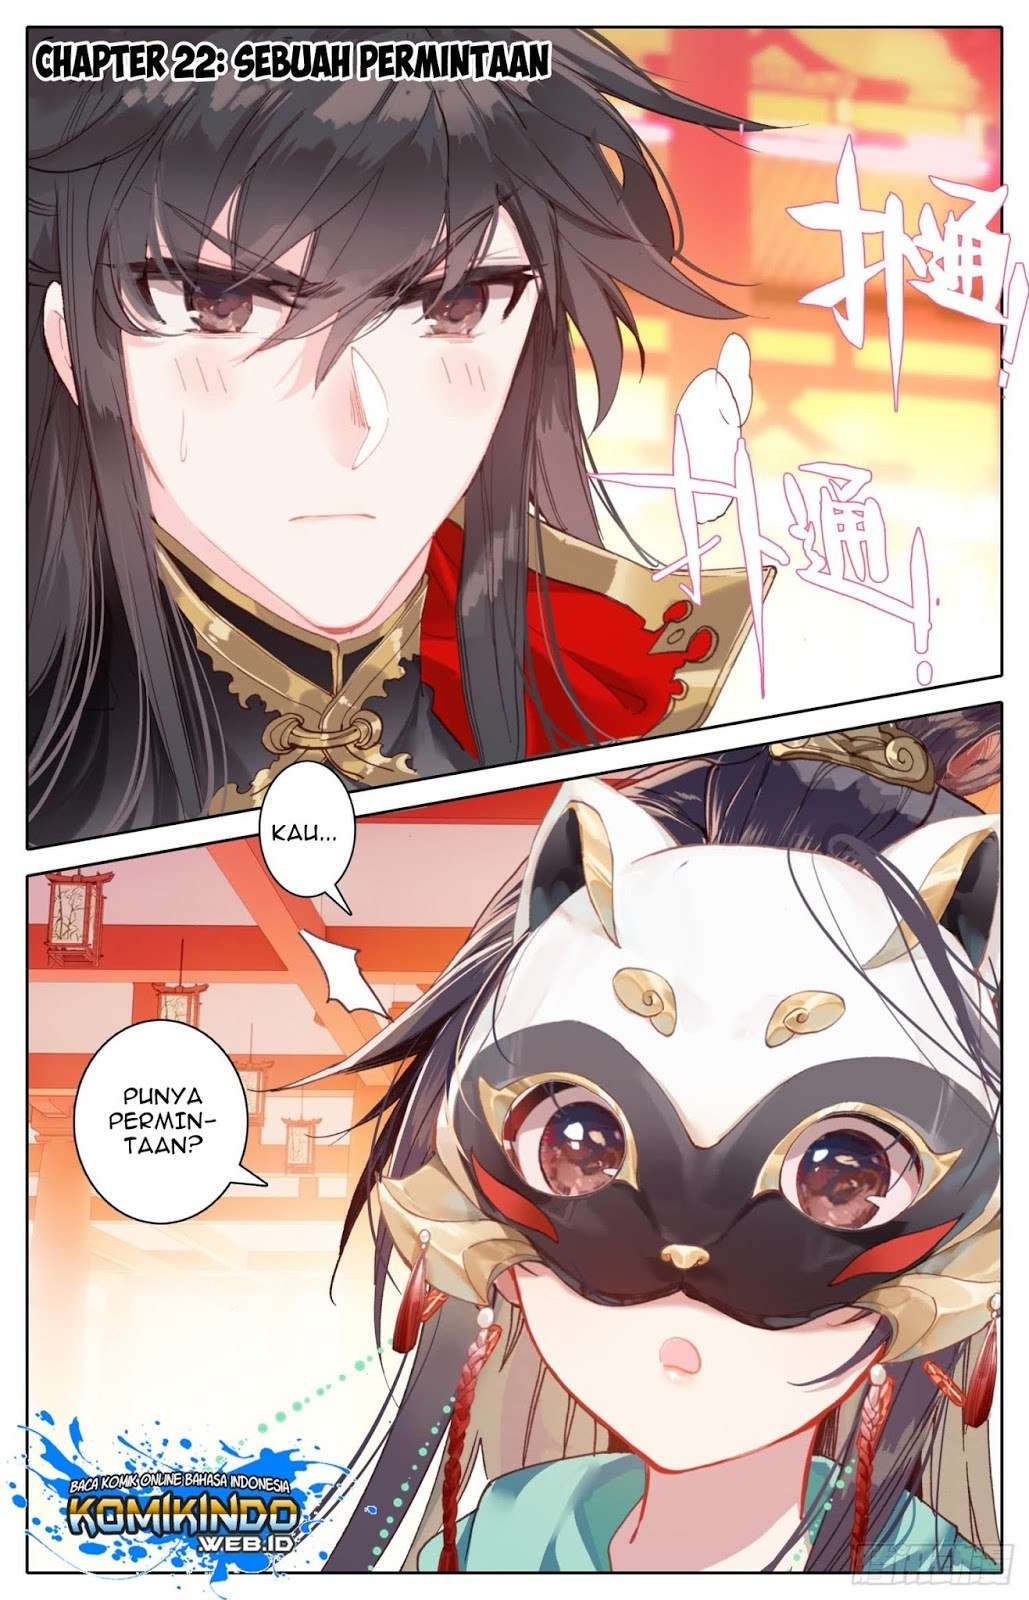 Legend of the Tyrant Empress Chapter 22 2